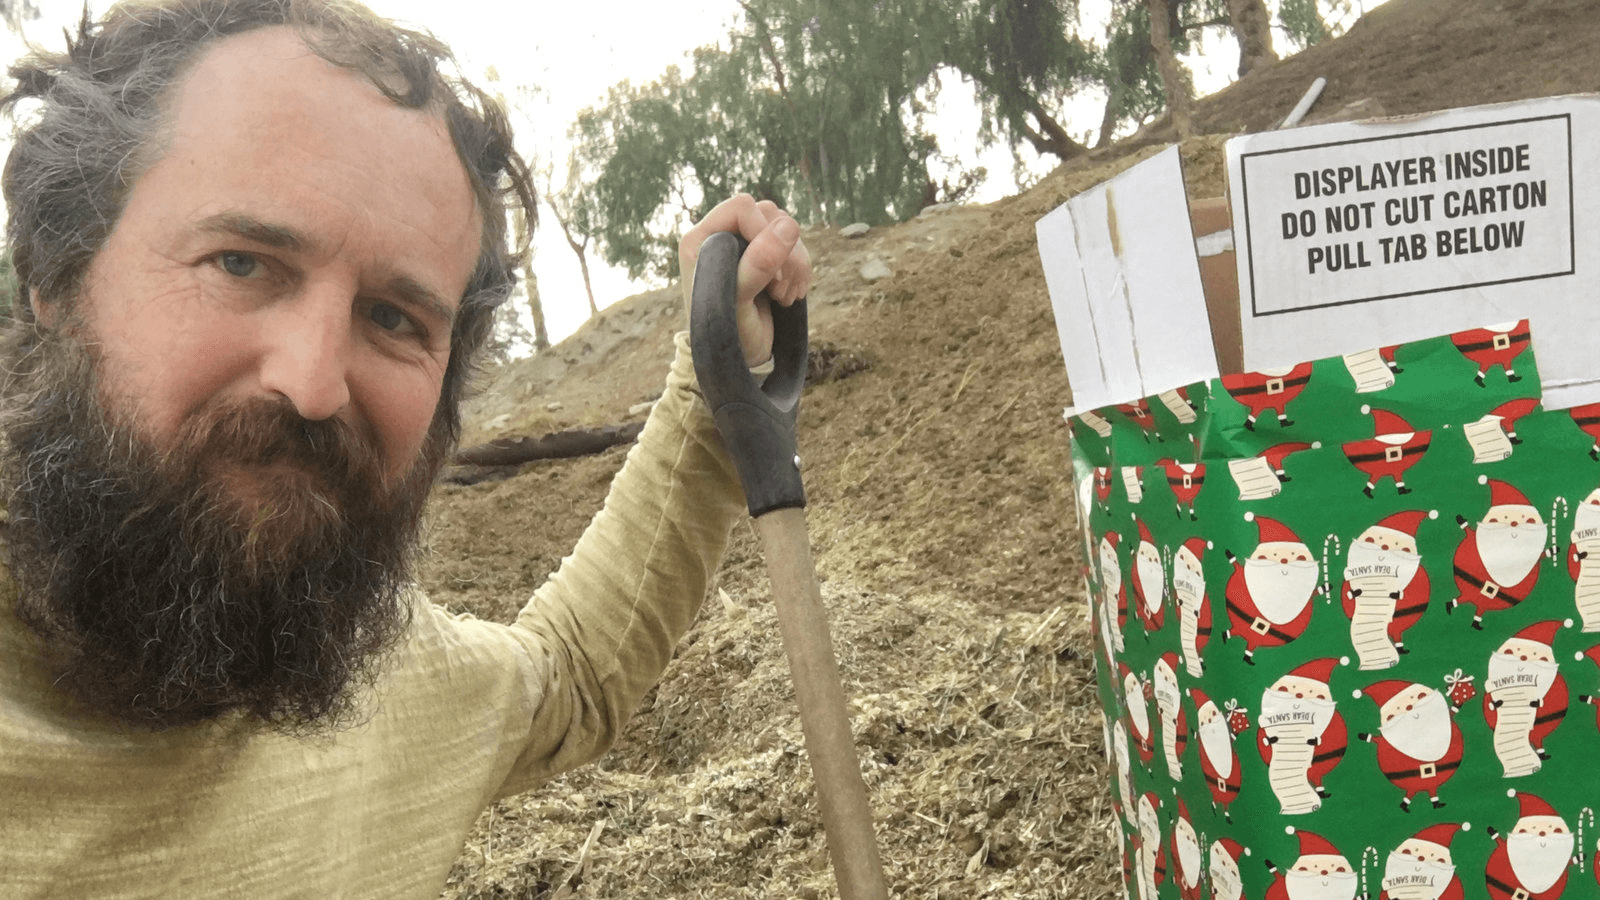 Robert Strong is seen next to a gift-wrapped box in this photo released by Robert Strong of Eagle Rock, California, on Dec. 25, 2017.